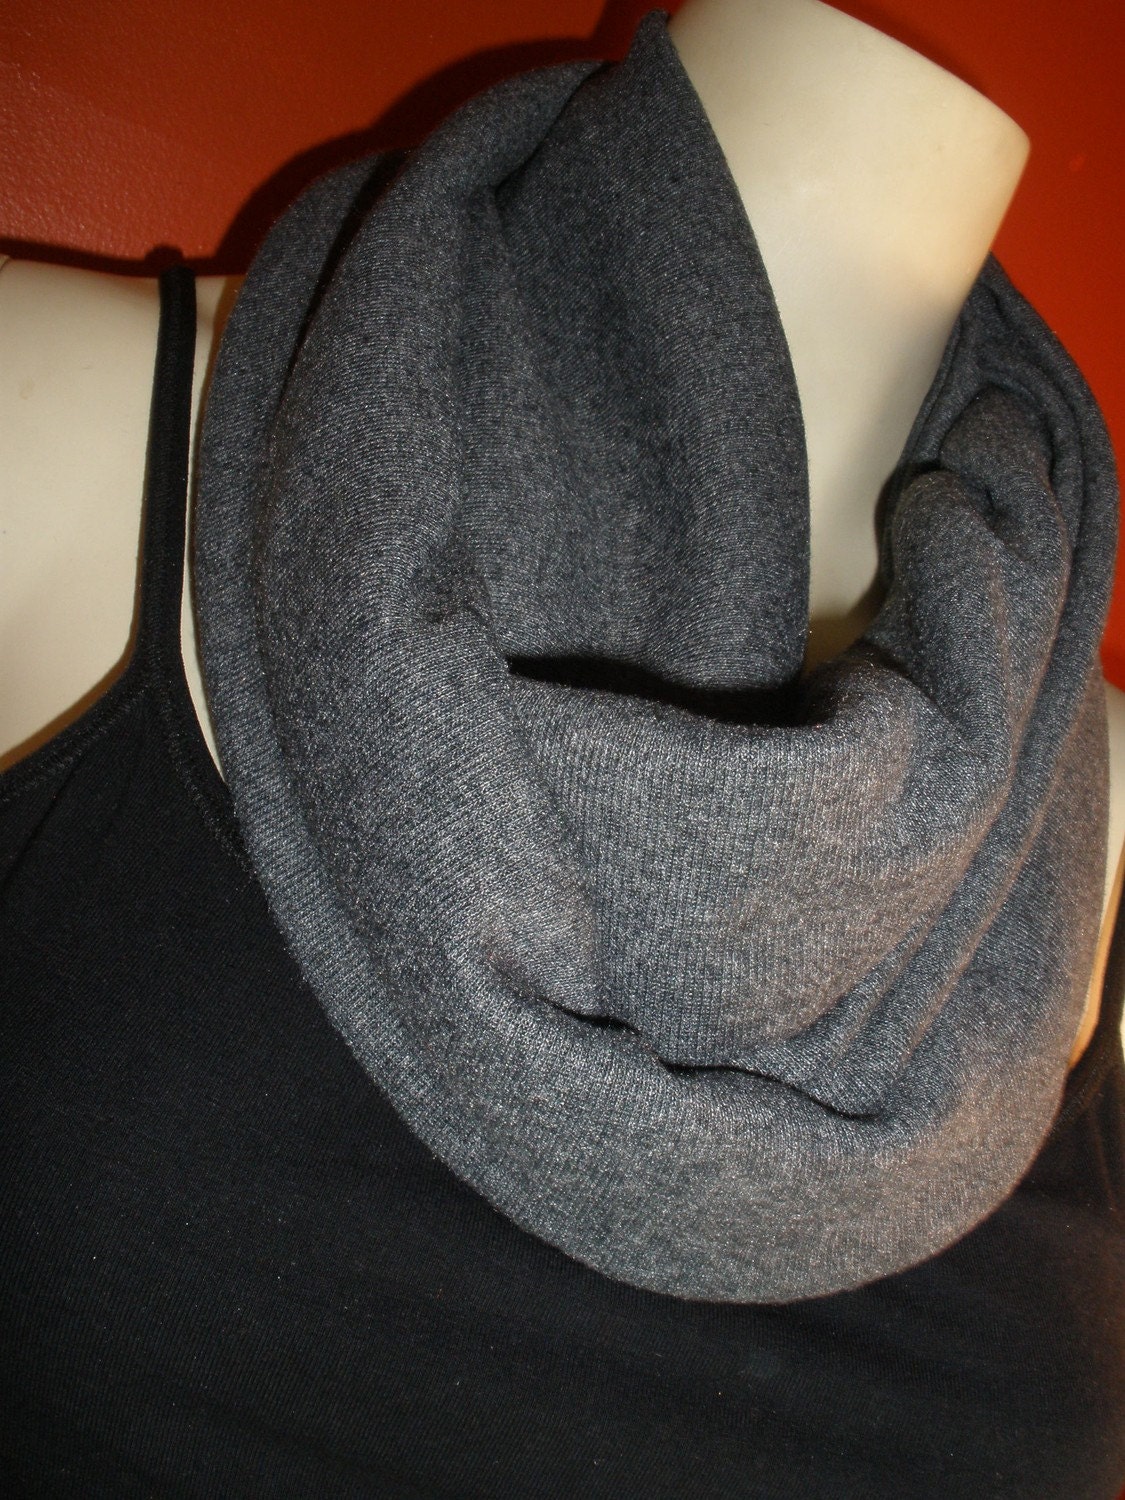 Fabulous Neck and Head Scarf Wrap For a Women or a Men